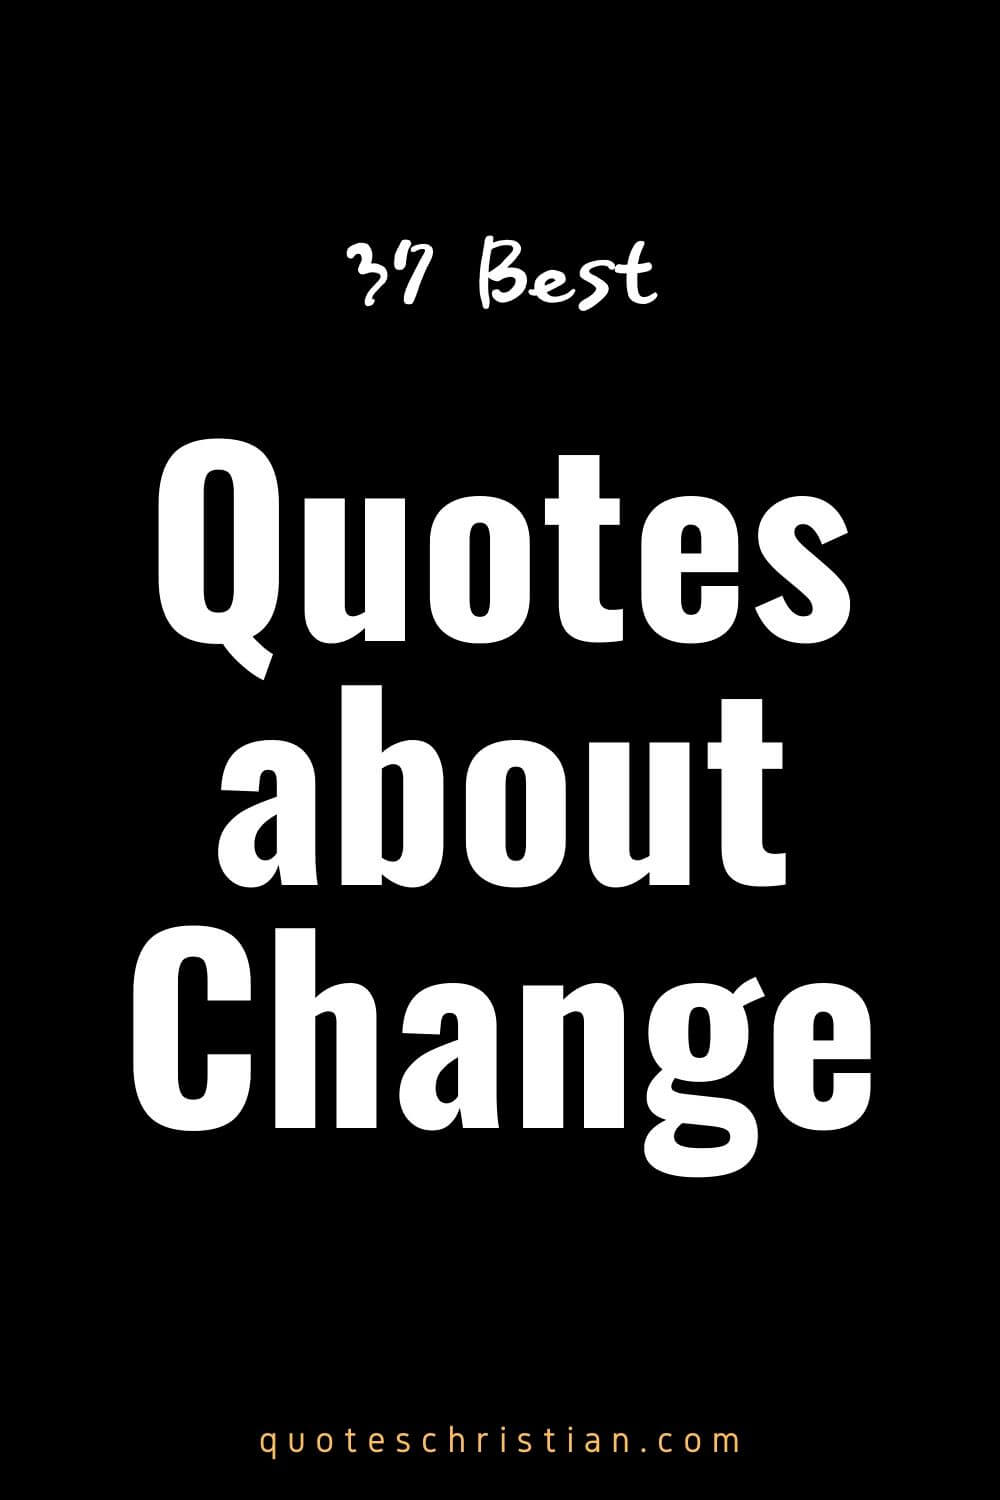 37 Best Quotes about Change: Uplifting quotes about change from your favorite authors. These inspirational change quotes about life will inspire you.